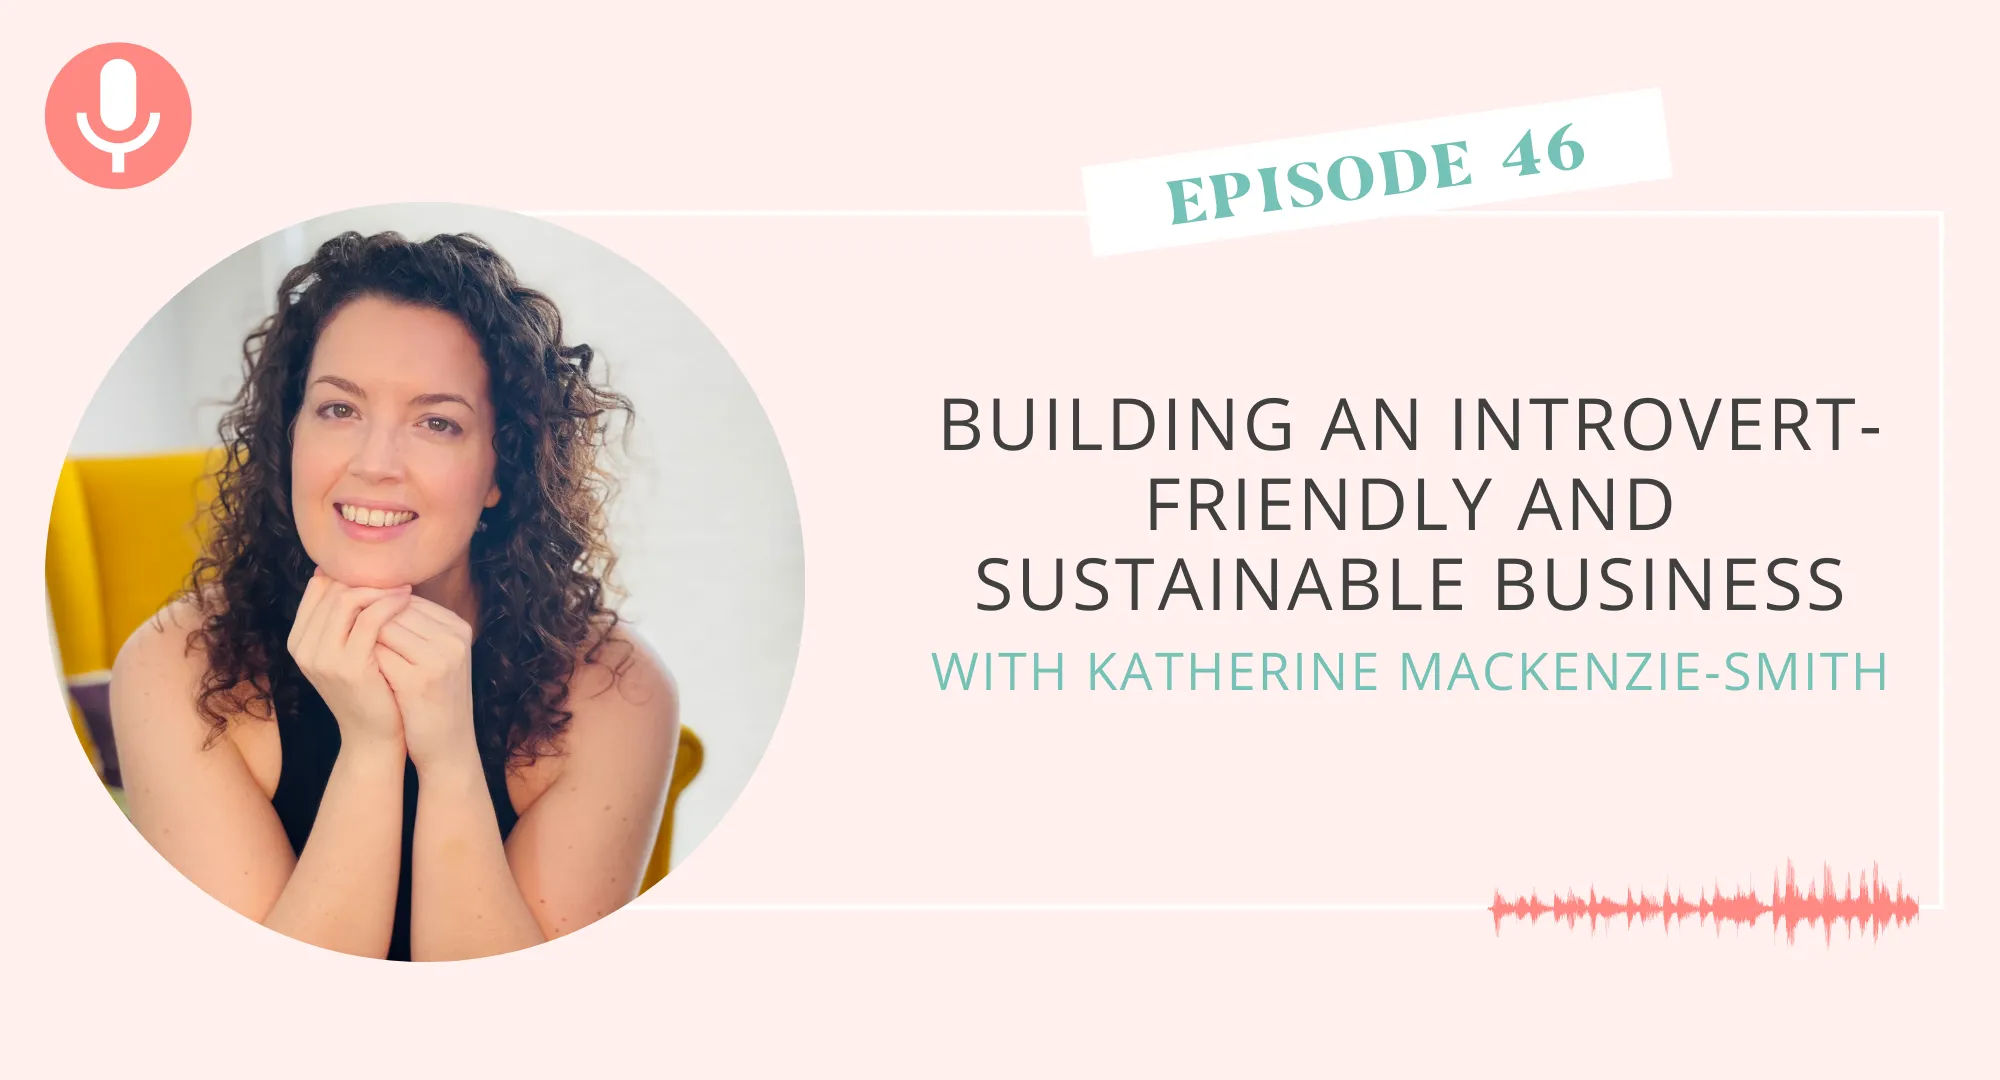 Building an Introvert-Friendly and Sustainable Business with Katherine Mackenzie-Smith